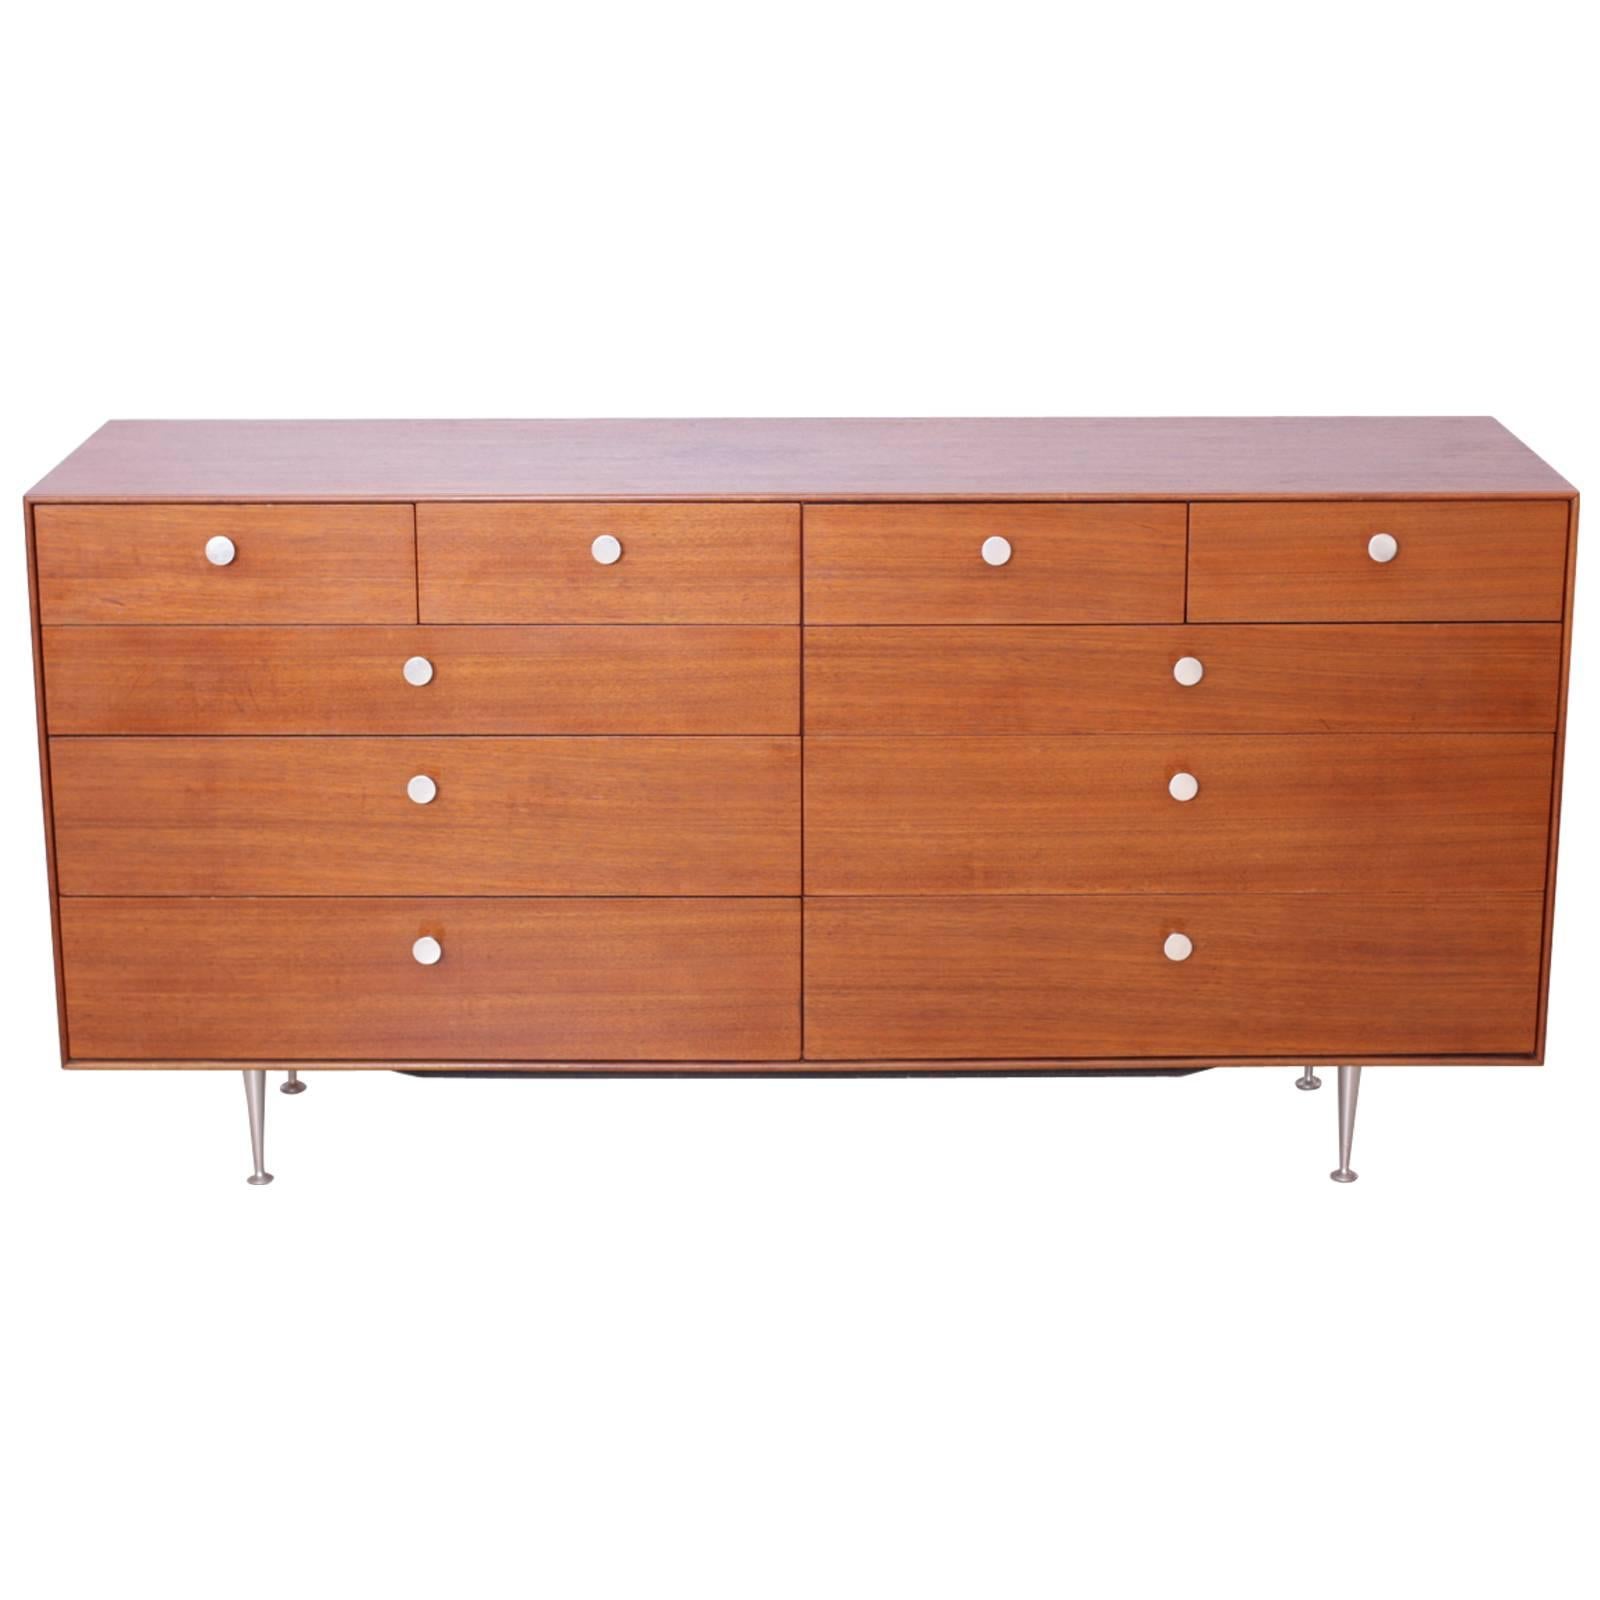 George Nelson Thin Edge Chest of Drawers in Walnut by Herman Miller